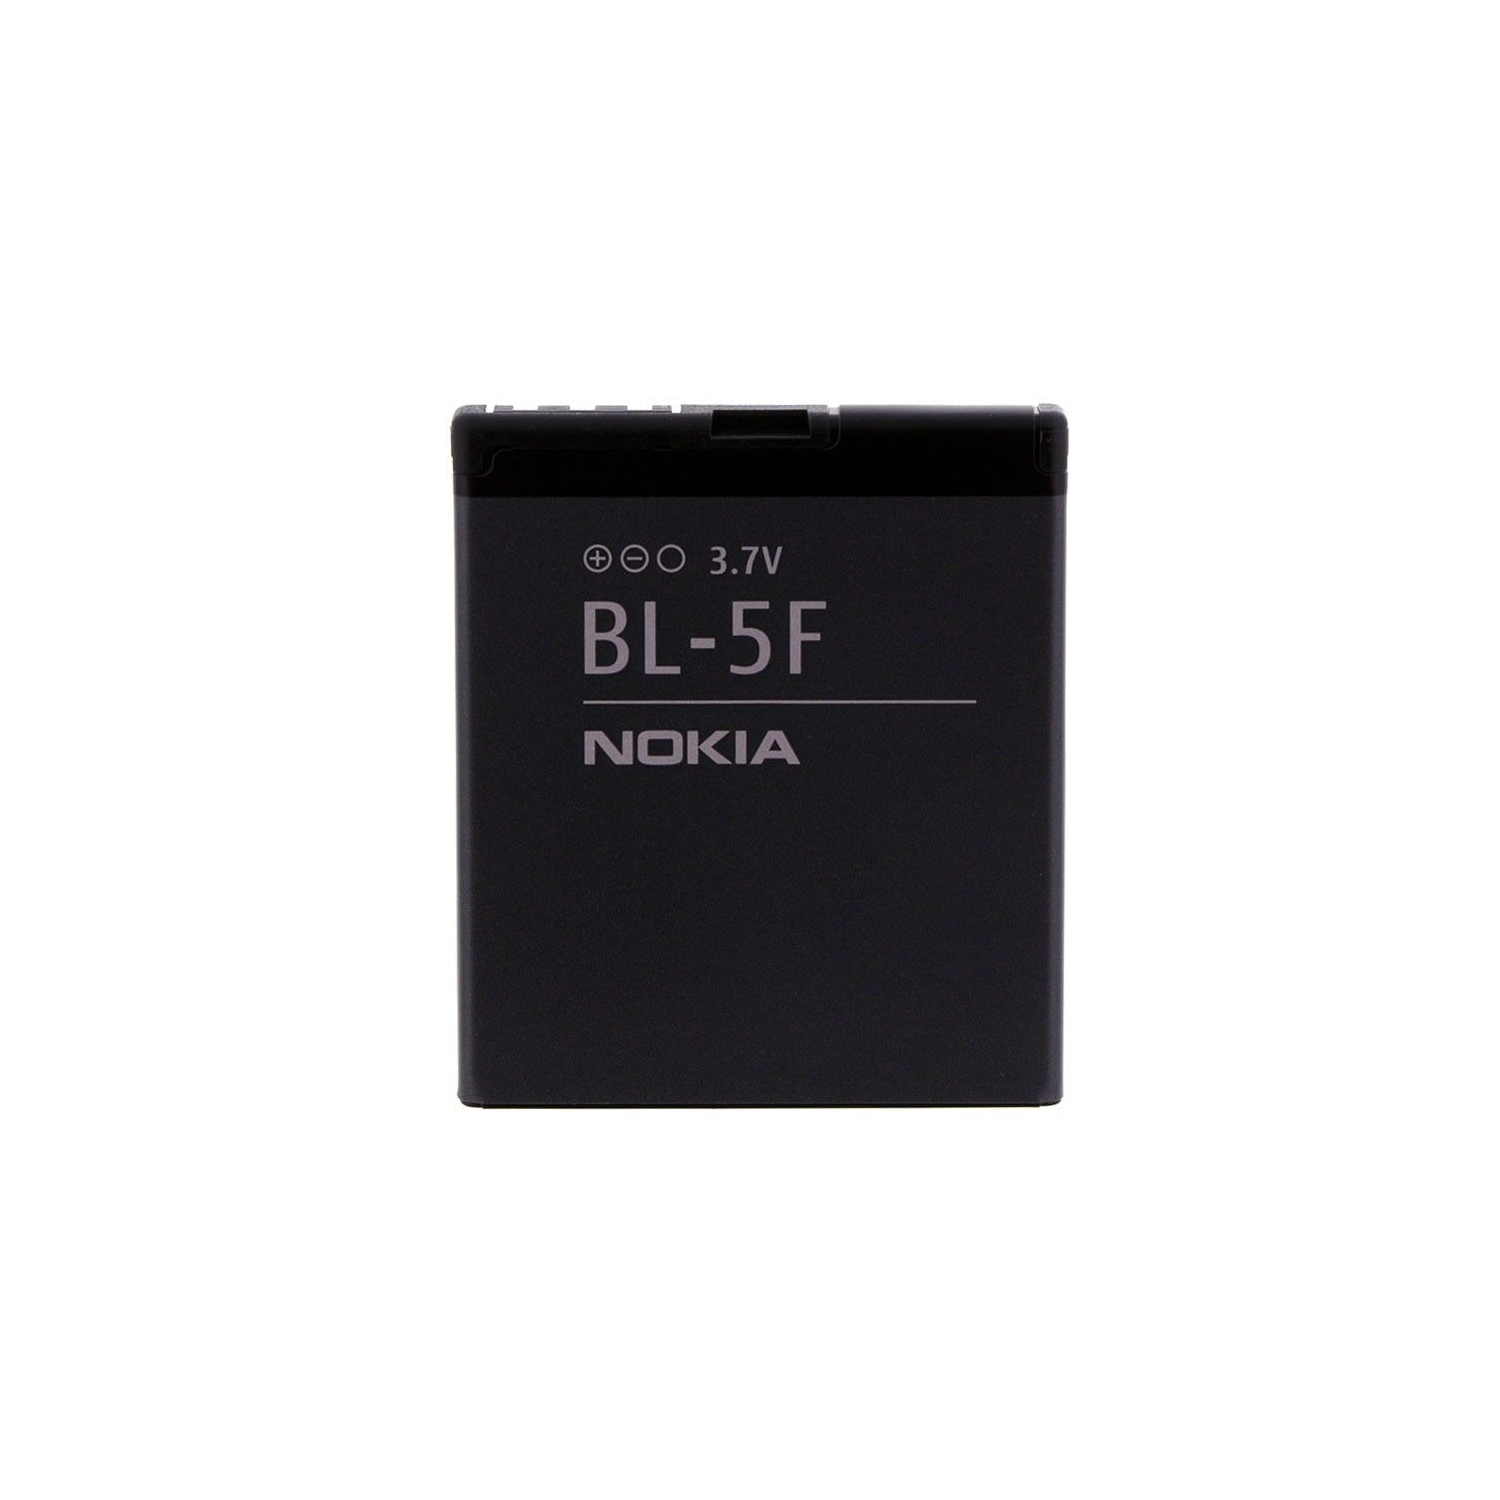 BL-5F Replacement Battery for Nokia E65 N93I N95 N96 6290 6210S X5 C5-01